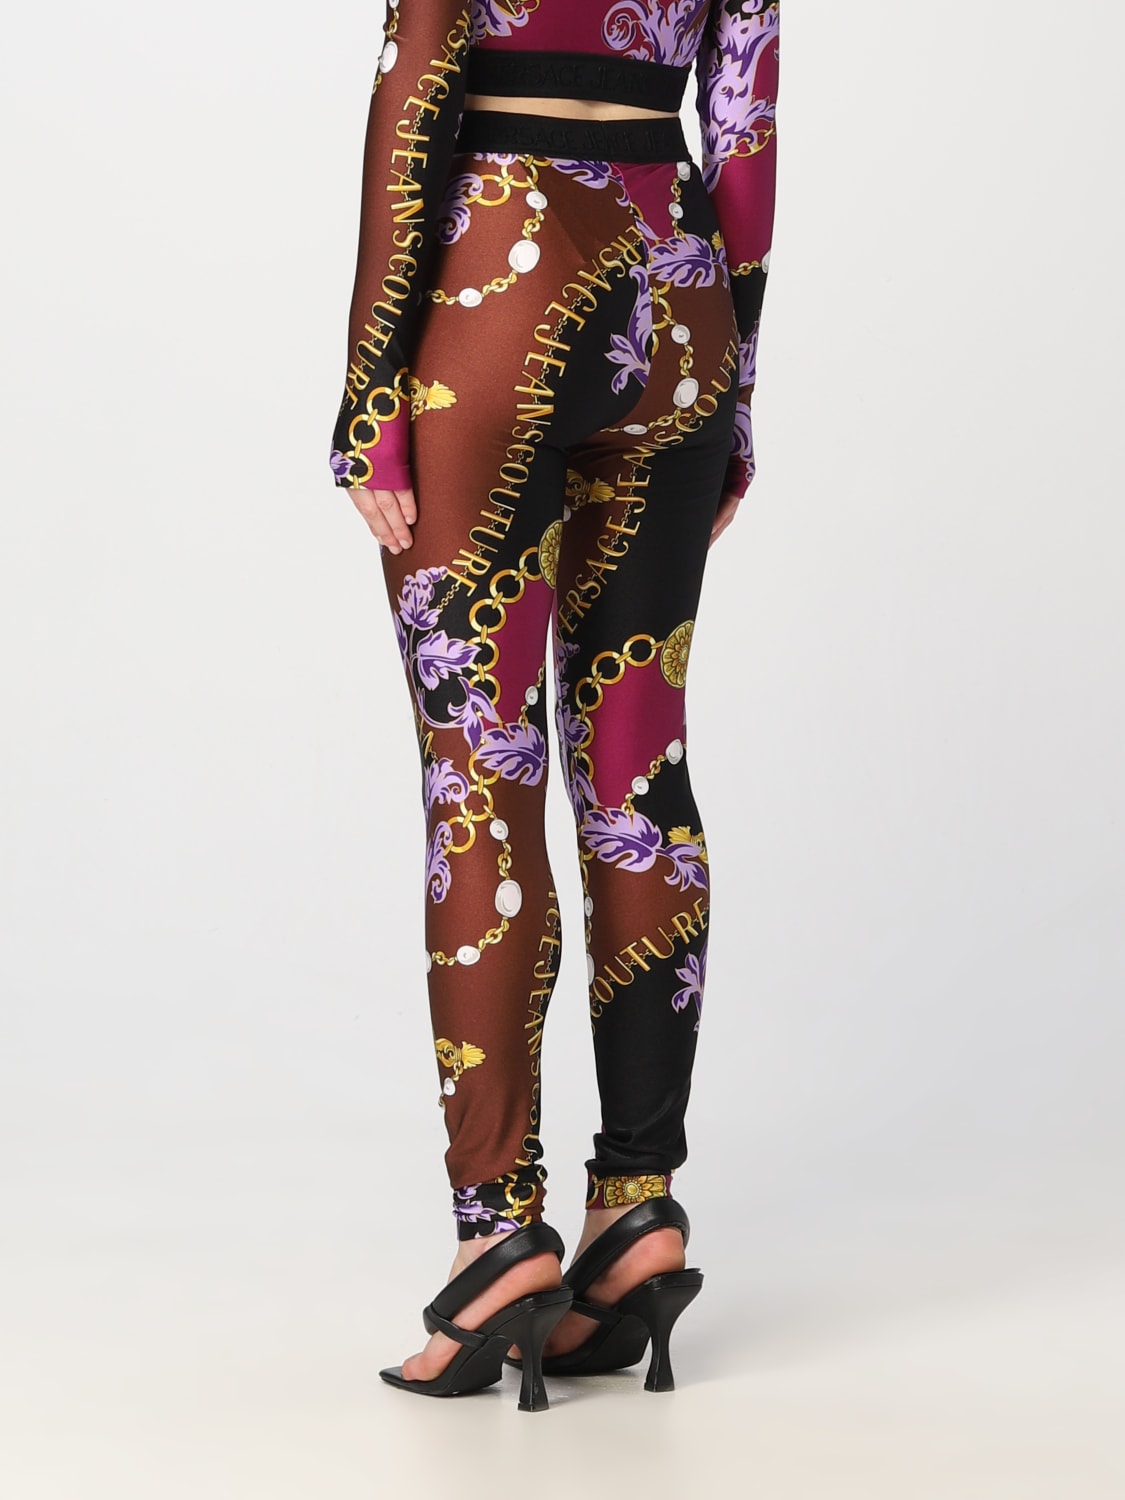 VERSACE JEANS COUTURE: nylon leggings with print - Multicolor  VERSACE  JEANS COUTURE pants 75HAC101JS203 online at